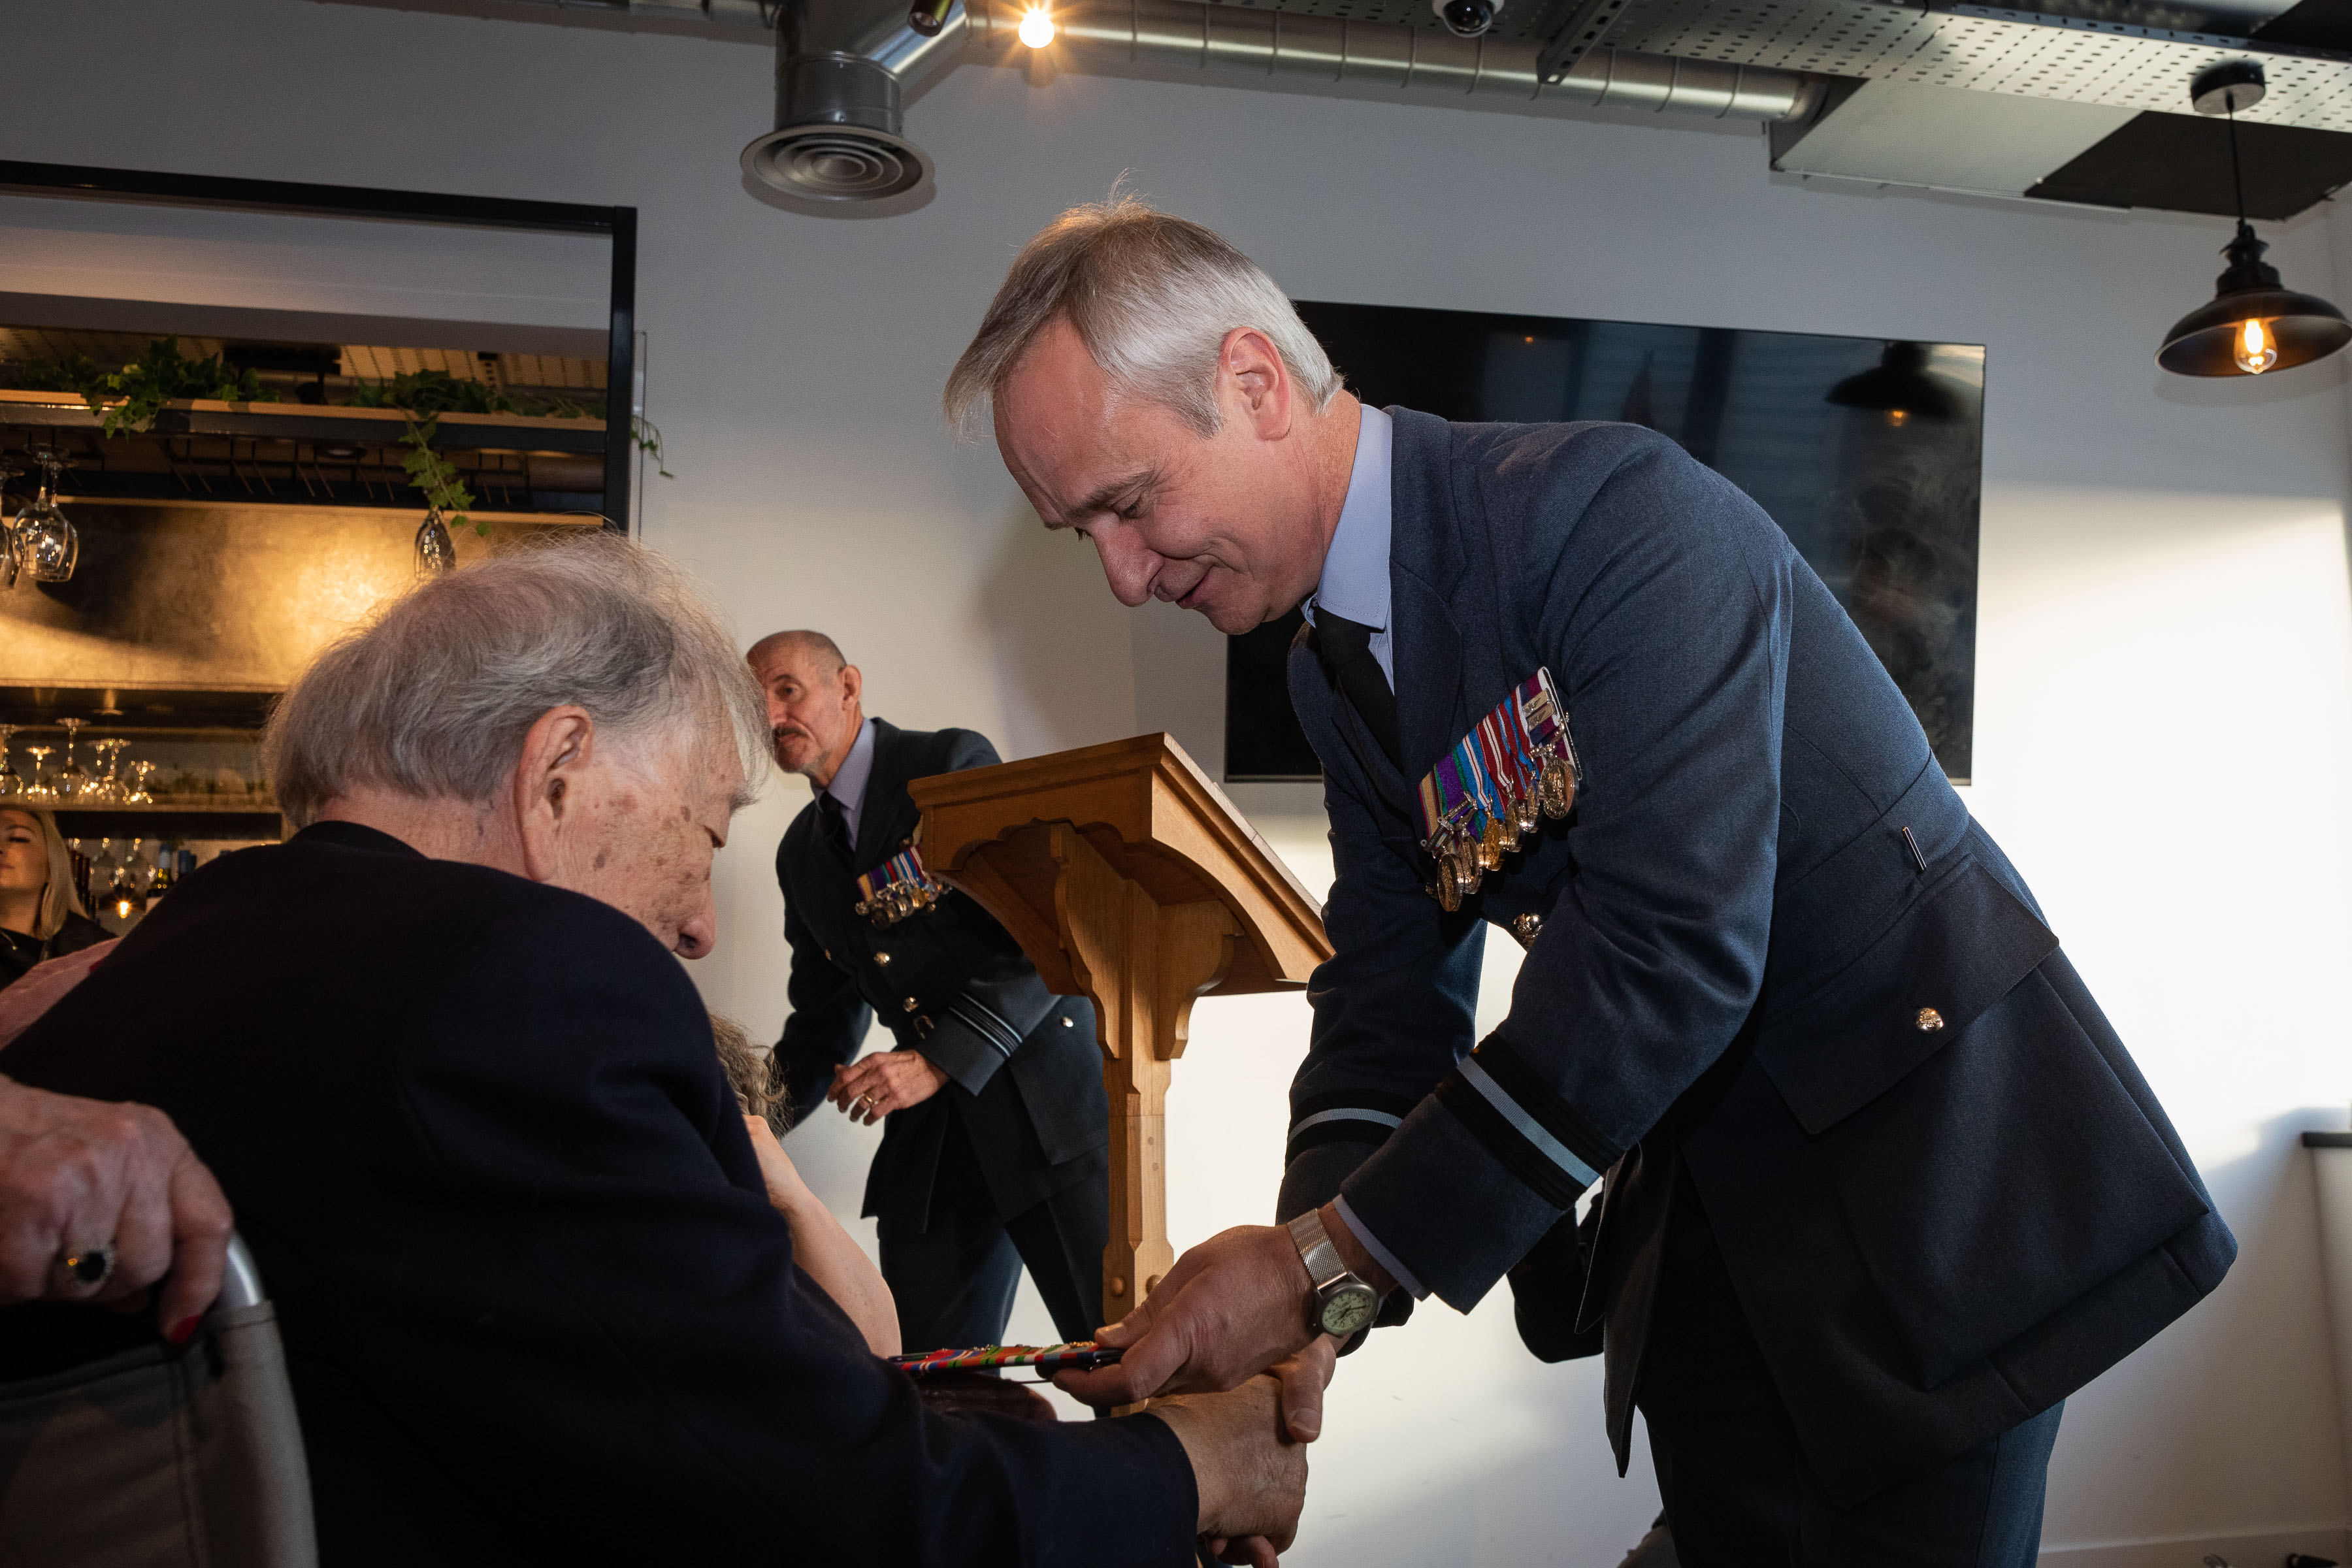 Image shows RAF aviator shaking hands with veteran.